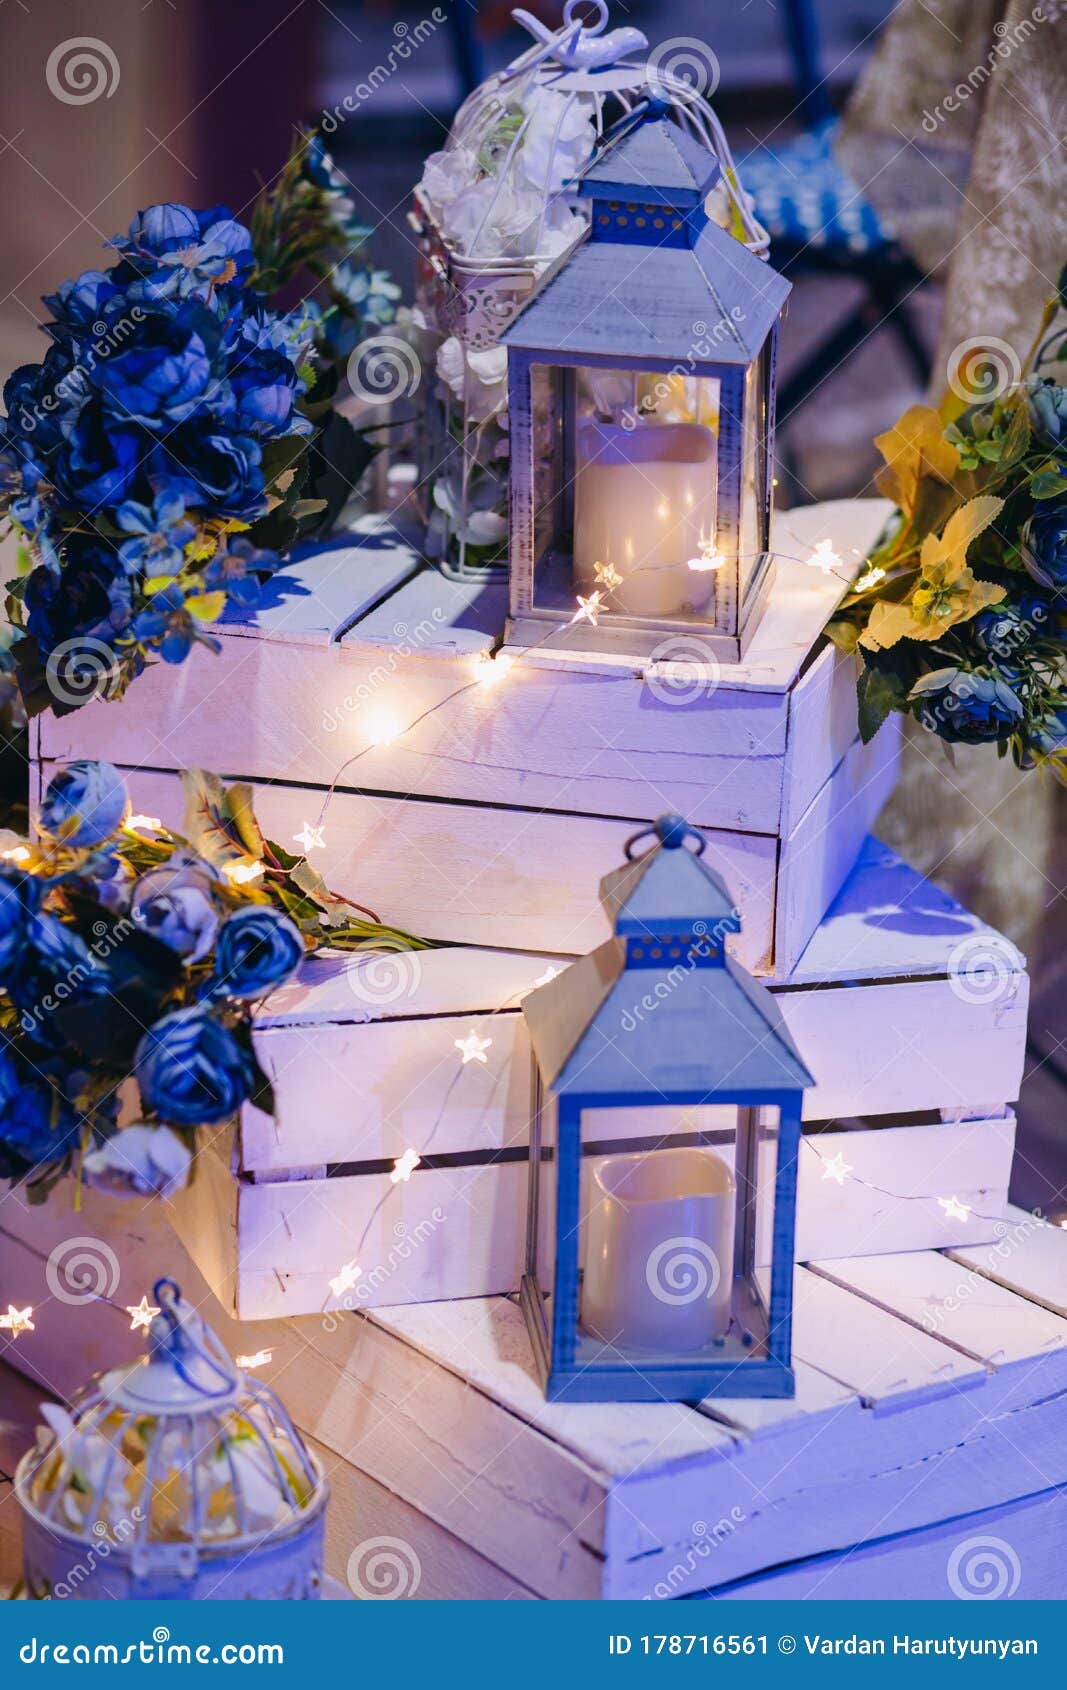 blueish decoration with wooden boxes